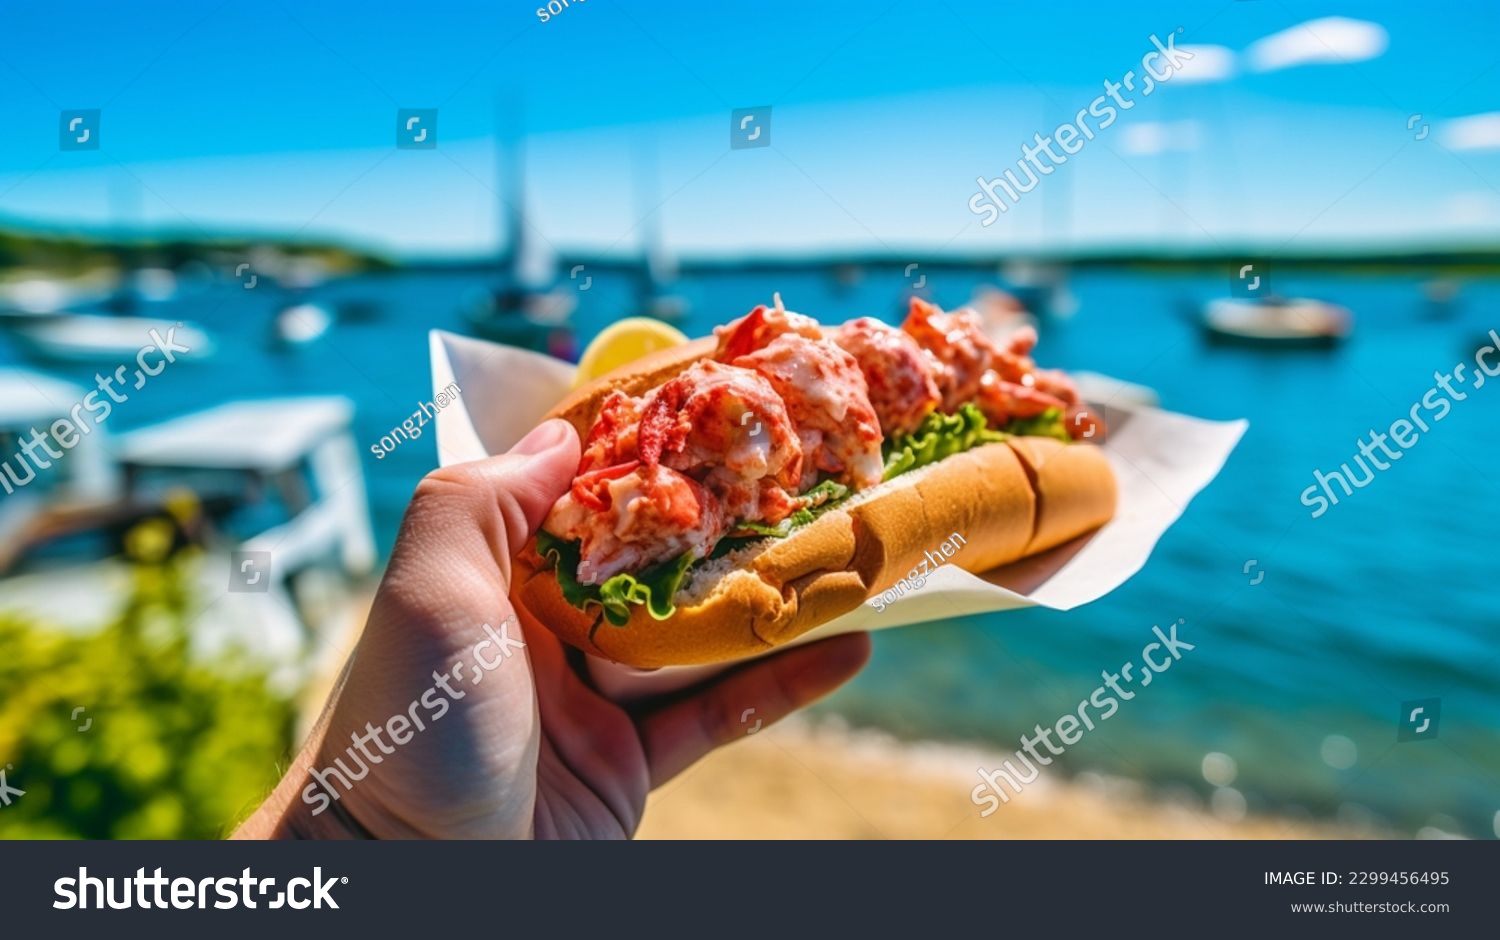 Slipper Lobster Roll is a type of sandwich typically made with slipper lobster meat that is mixed with various ingredients such as mayonnaise, herbs, lemon juice, and seasonings. #2299456495